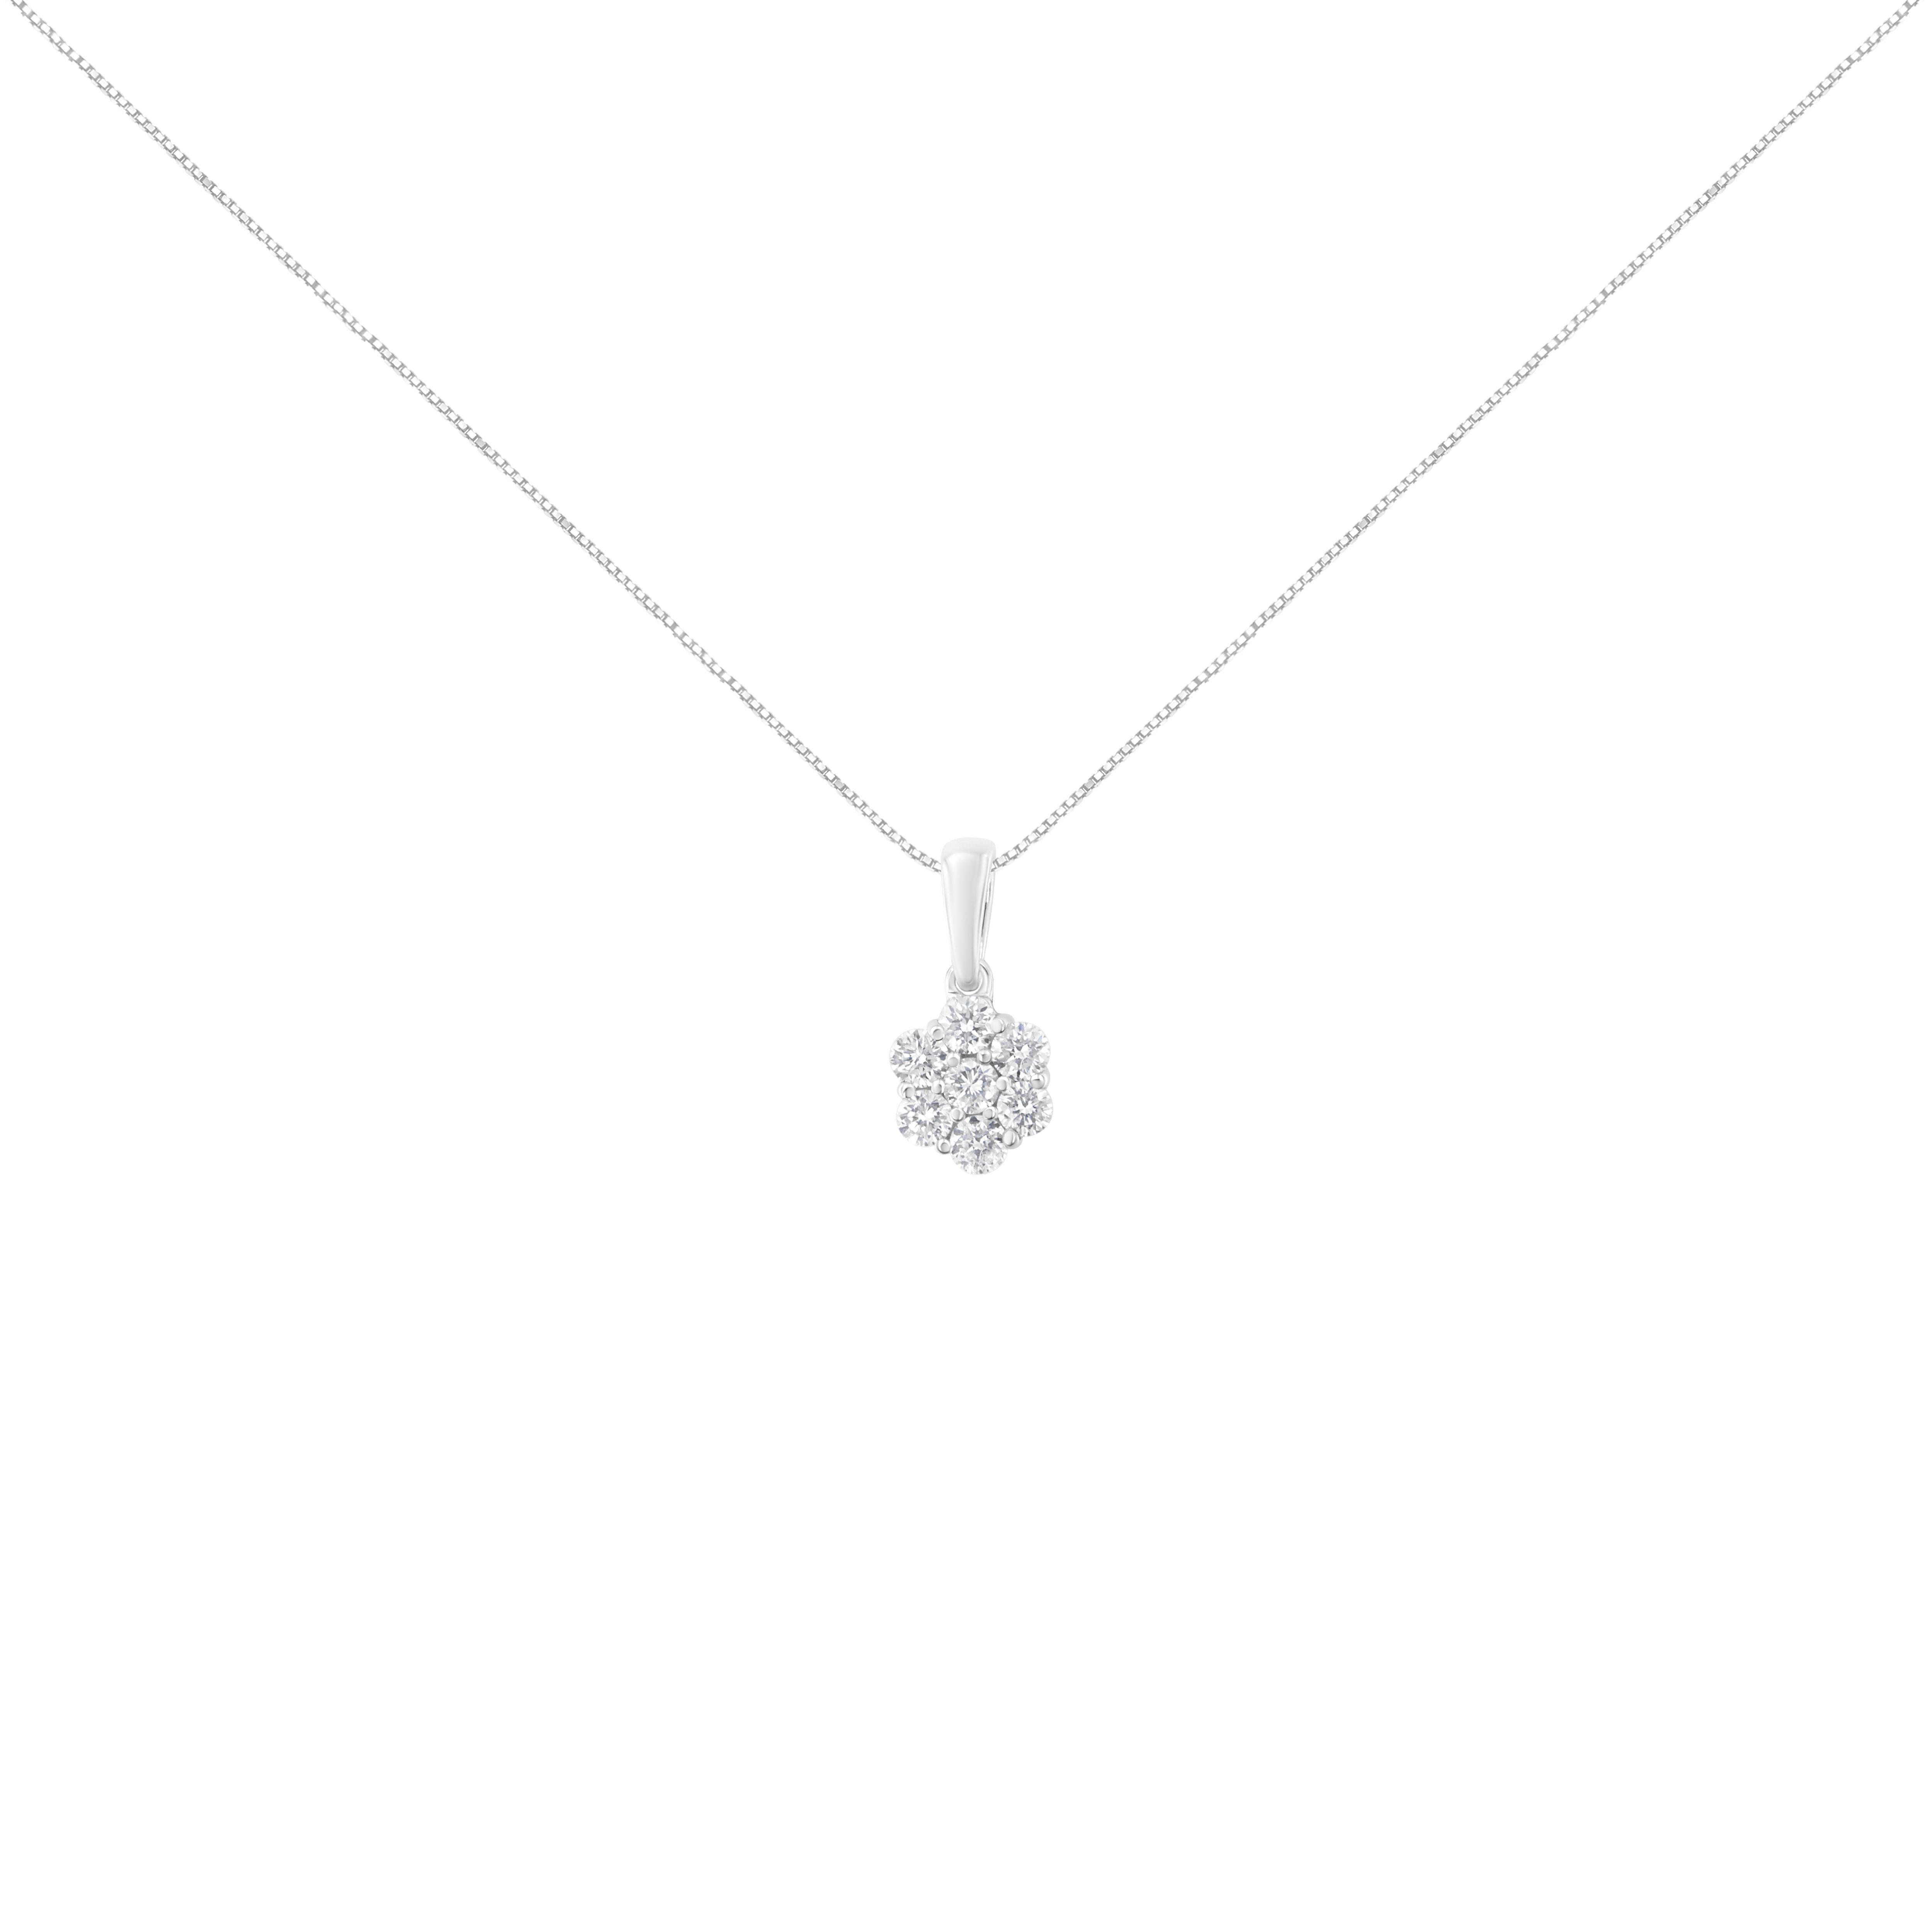 This stunning floral cluster pendant is designed with 7, natural diamonds in a glistening prong setting. Designed in the finest 14k white gold, this necklace boasts 1/2 ct tdw. The diamonds have an H-I color grade and an SI2-I1 clarity grade. This